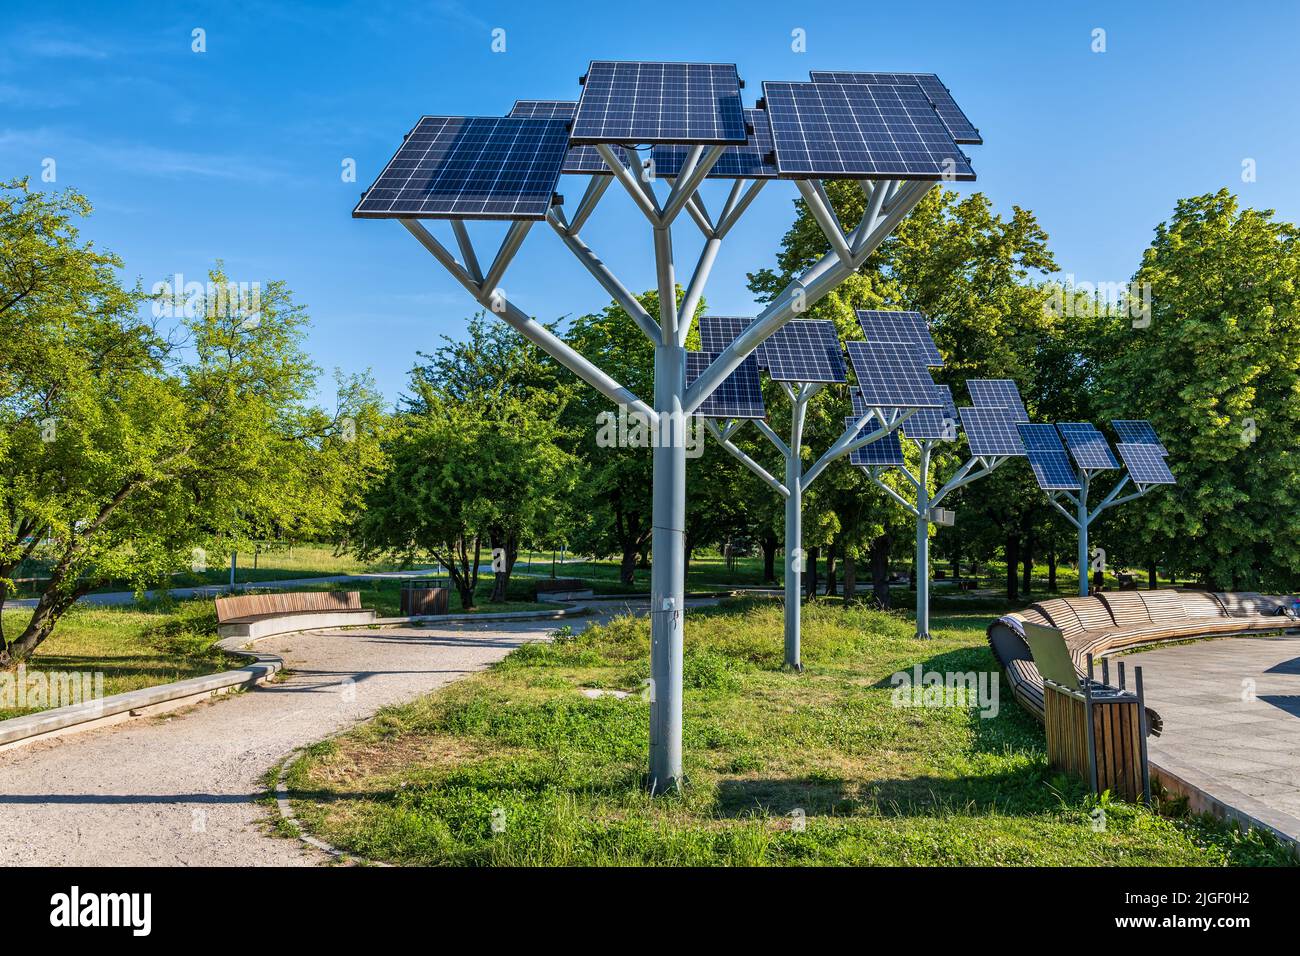 Solar panels on a stand in city park, photovoltaic modules, sustainable renewable energy source. Stock Photo